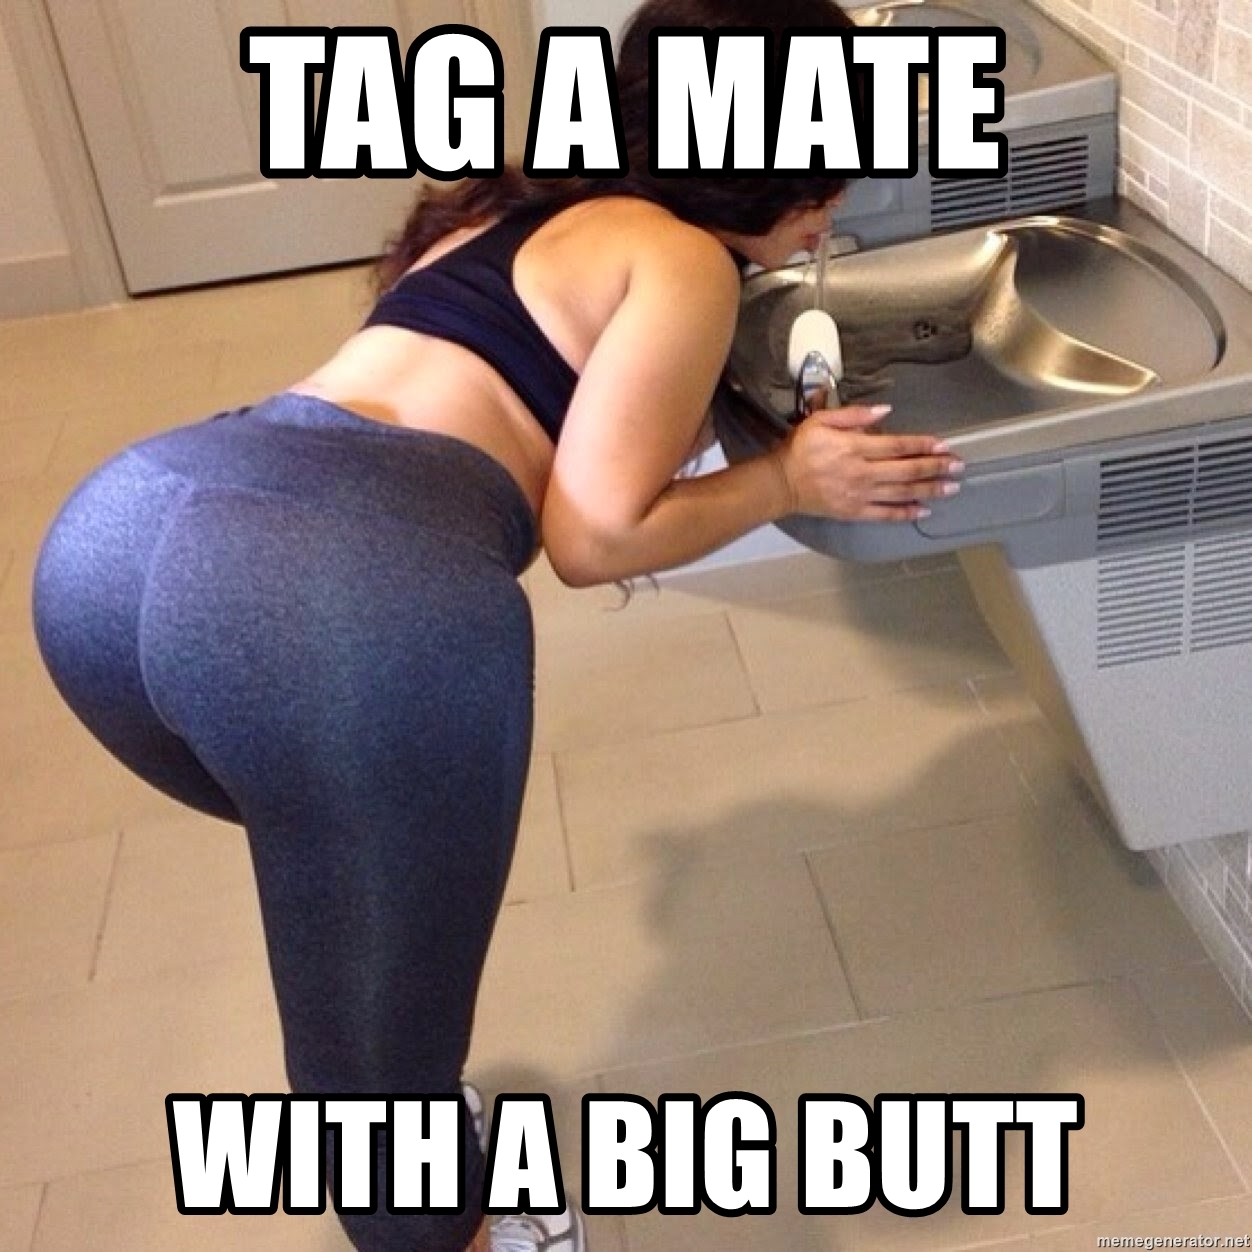 50+ Hilarious Booty Memes That Are Too Funny For Words.